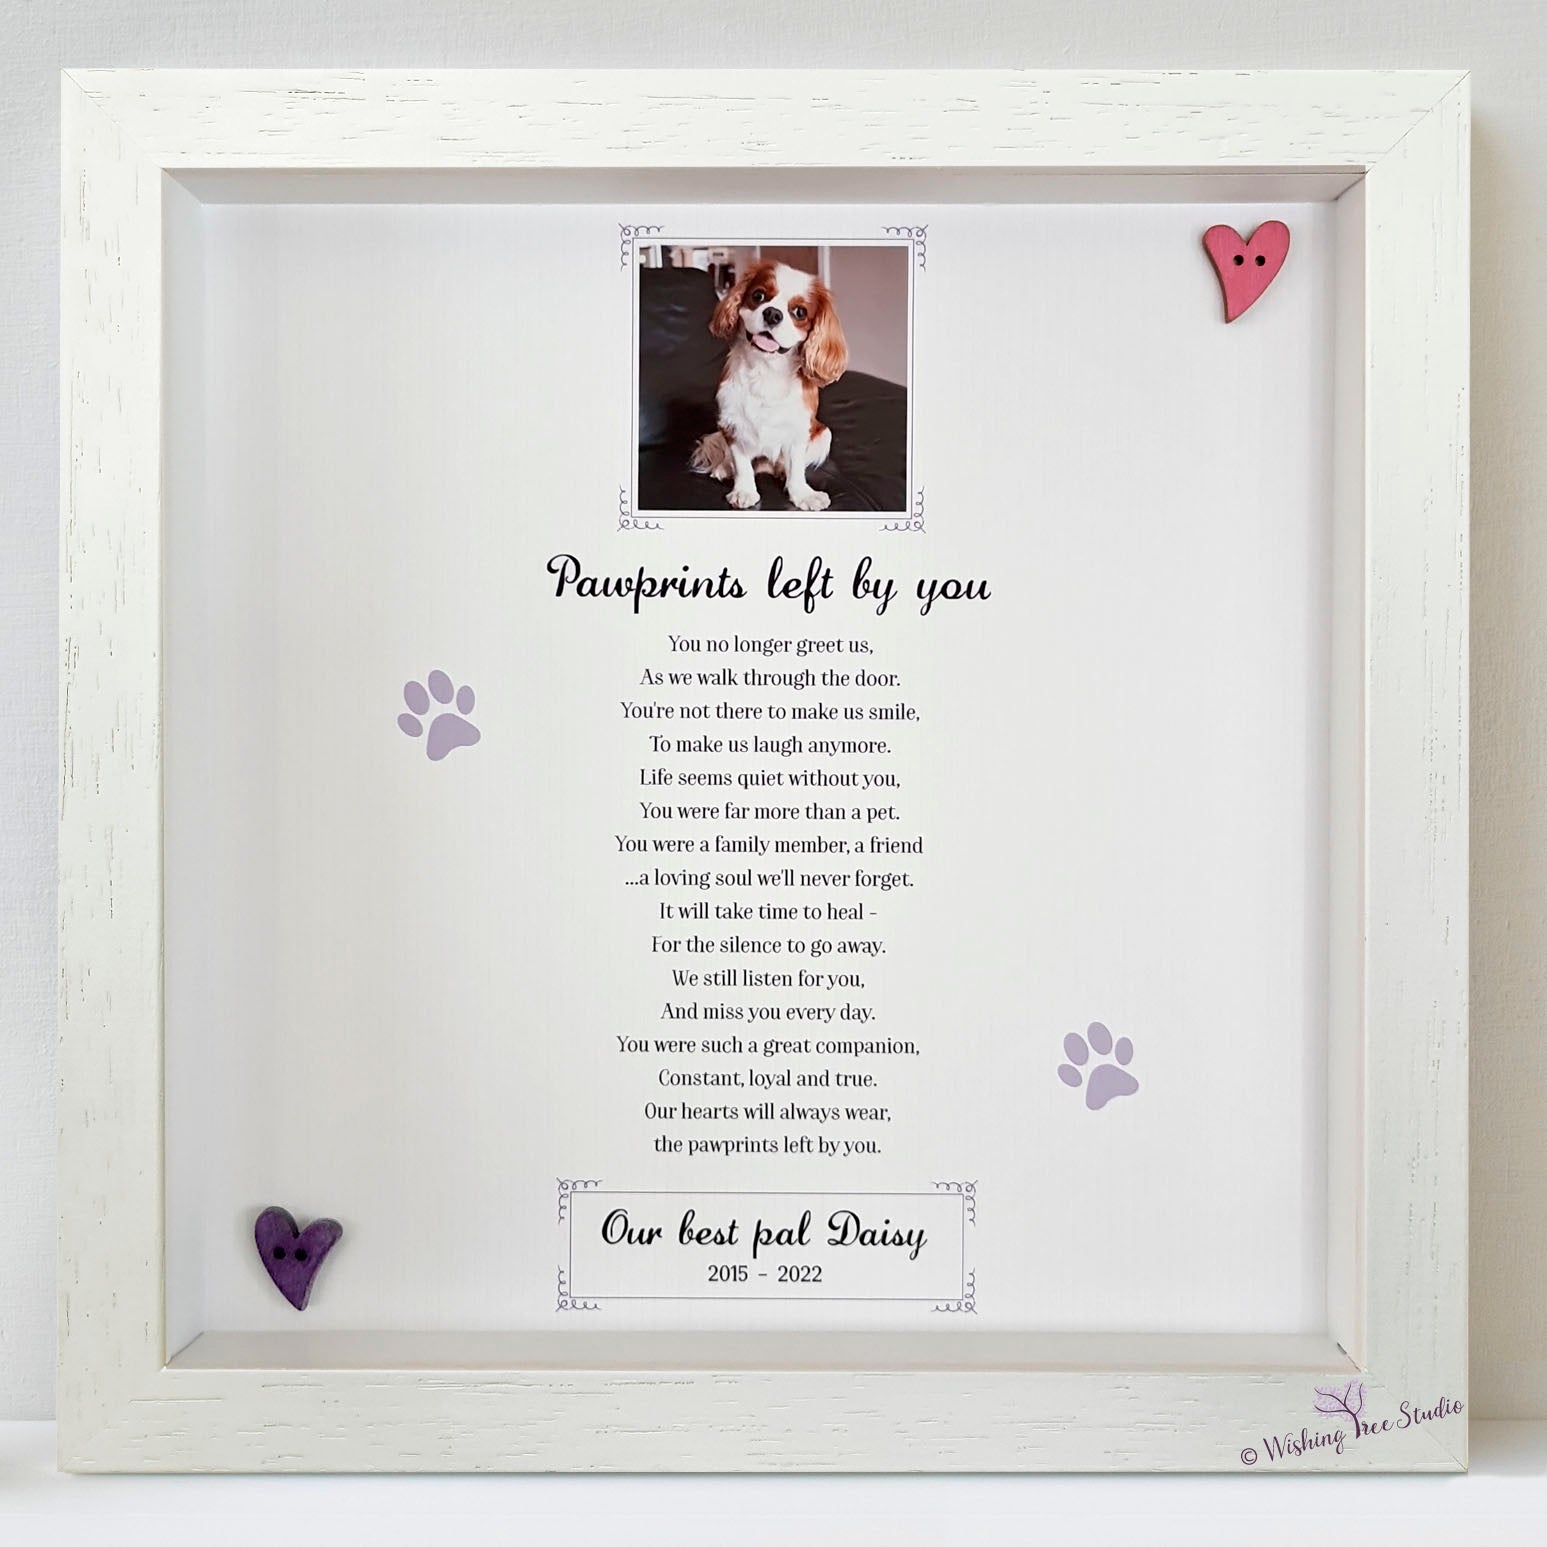 Pawprints left by you Pet memorial frame